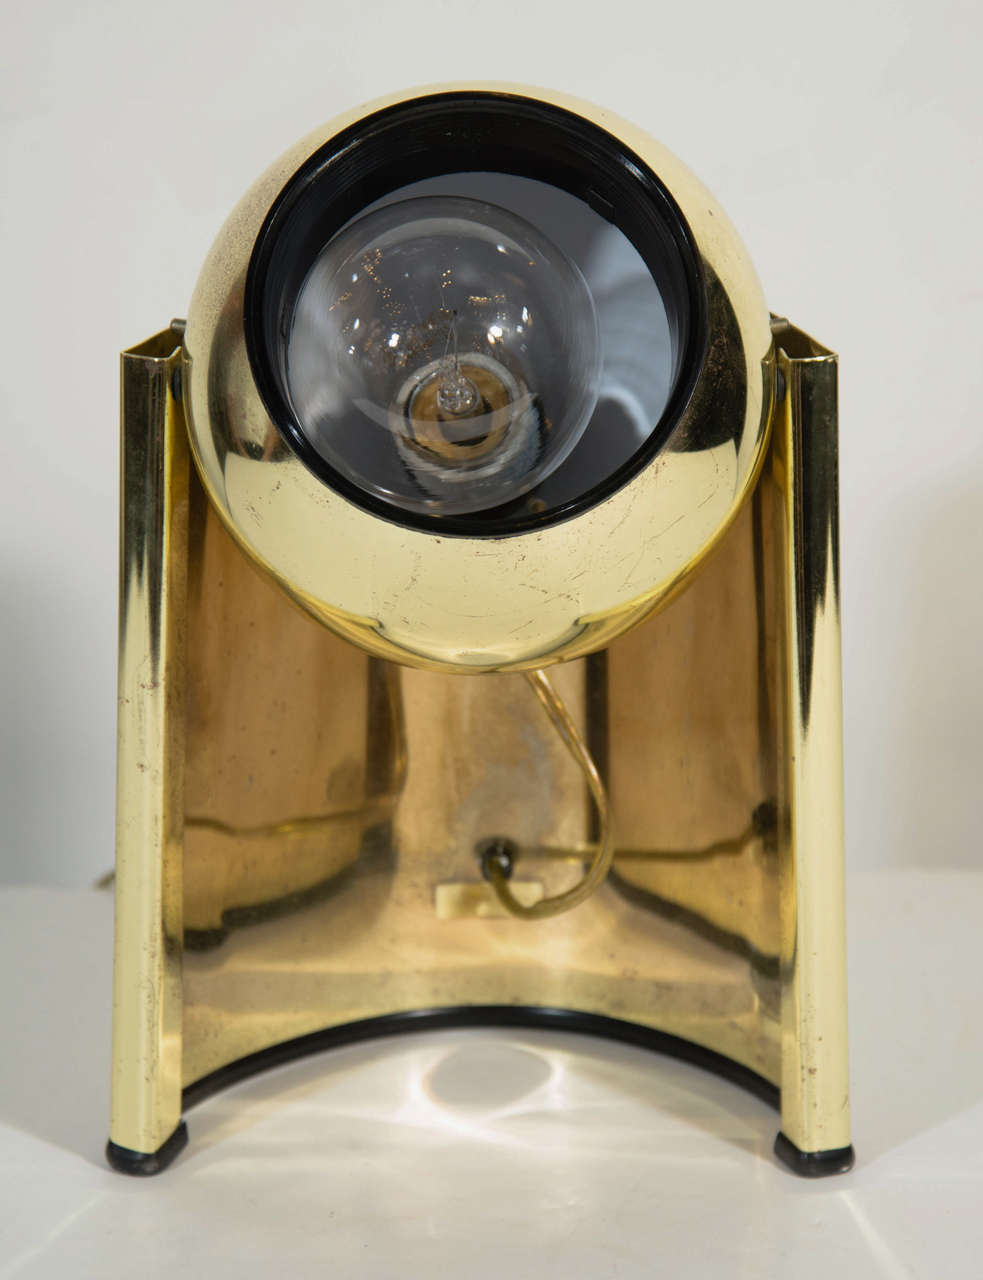 Pair of vintage orb spot lights in polished brass banded frames with black acrylic resin fittings. The lamps have curved orbital space age forms and feature adjustable spheres for preferred light direction. 